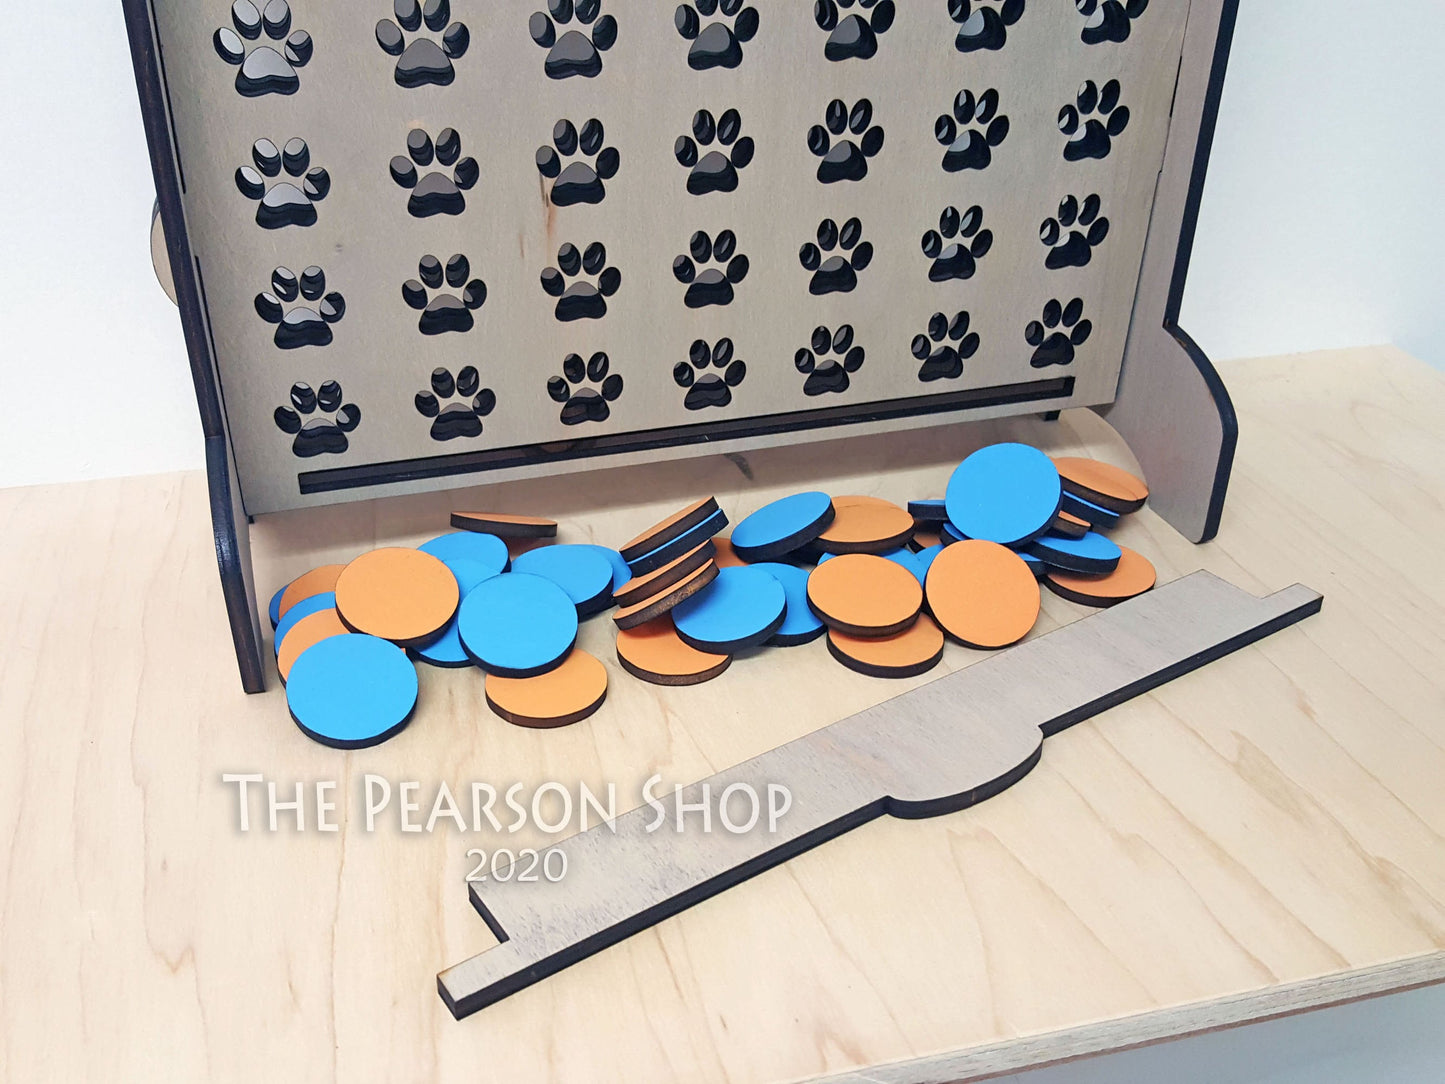 Connect 4 Paw Prints Game